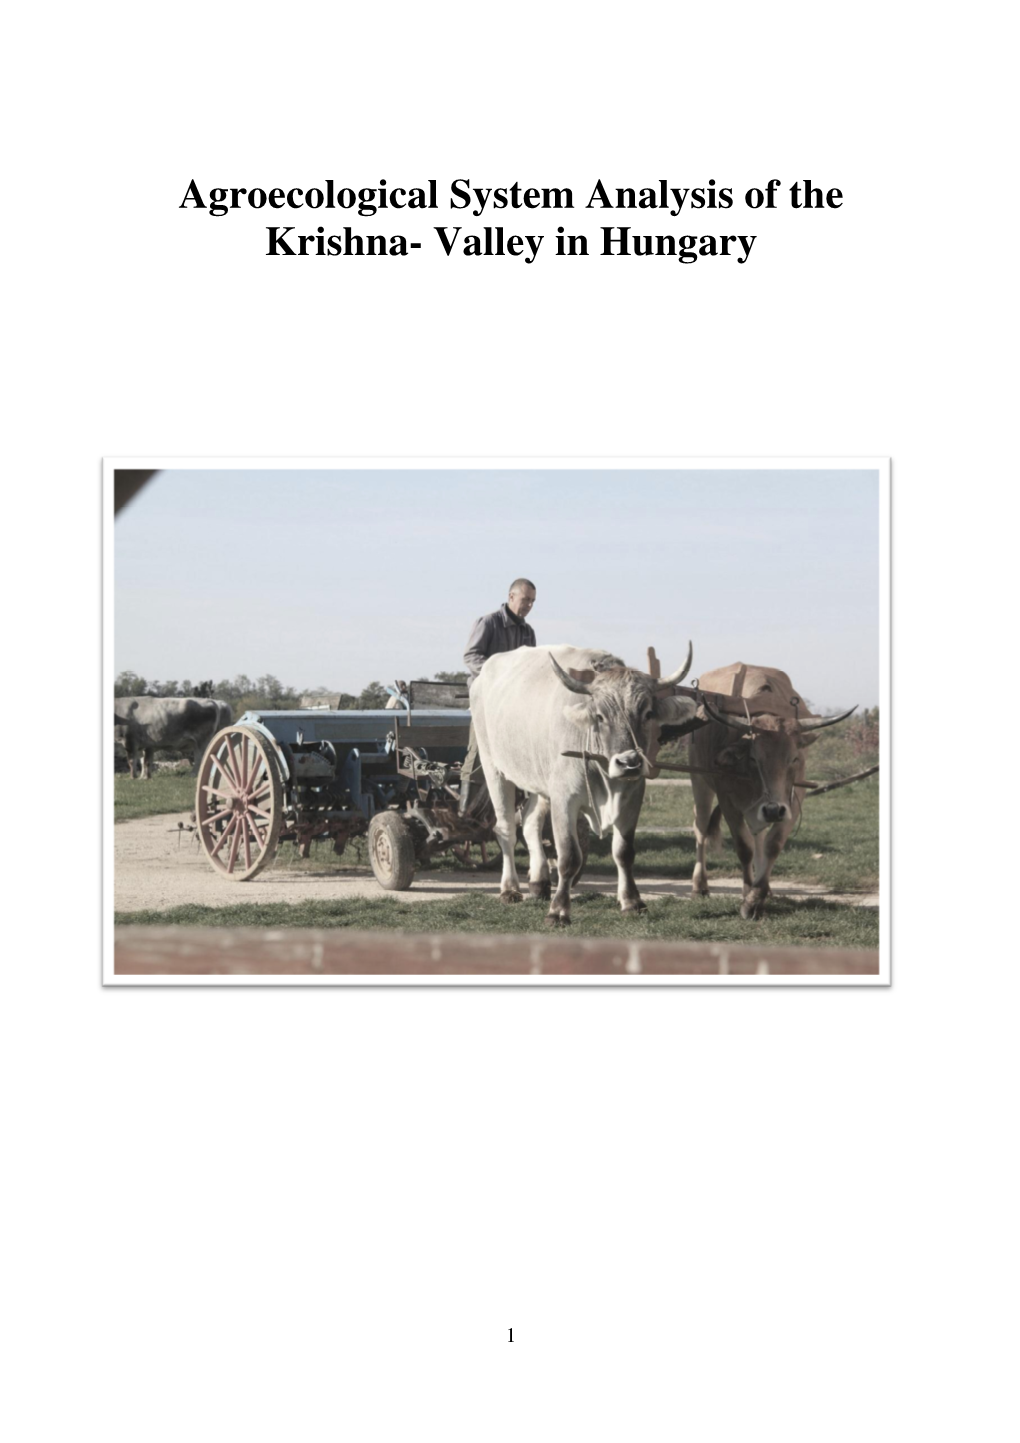 Agroecological System Analysis of the Krishna- Valley in Hungary